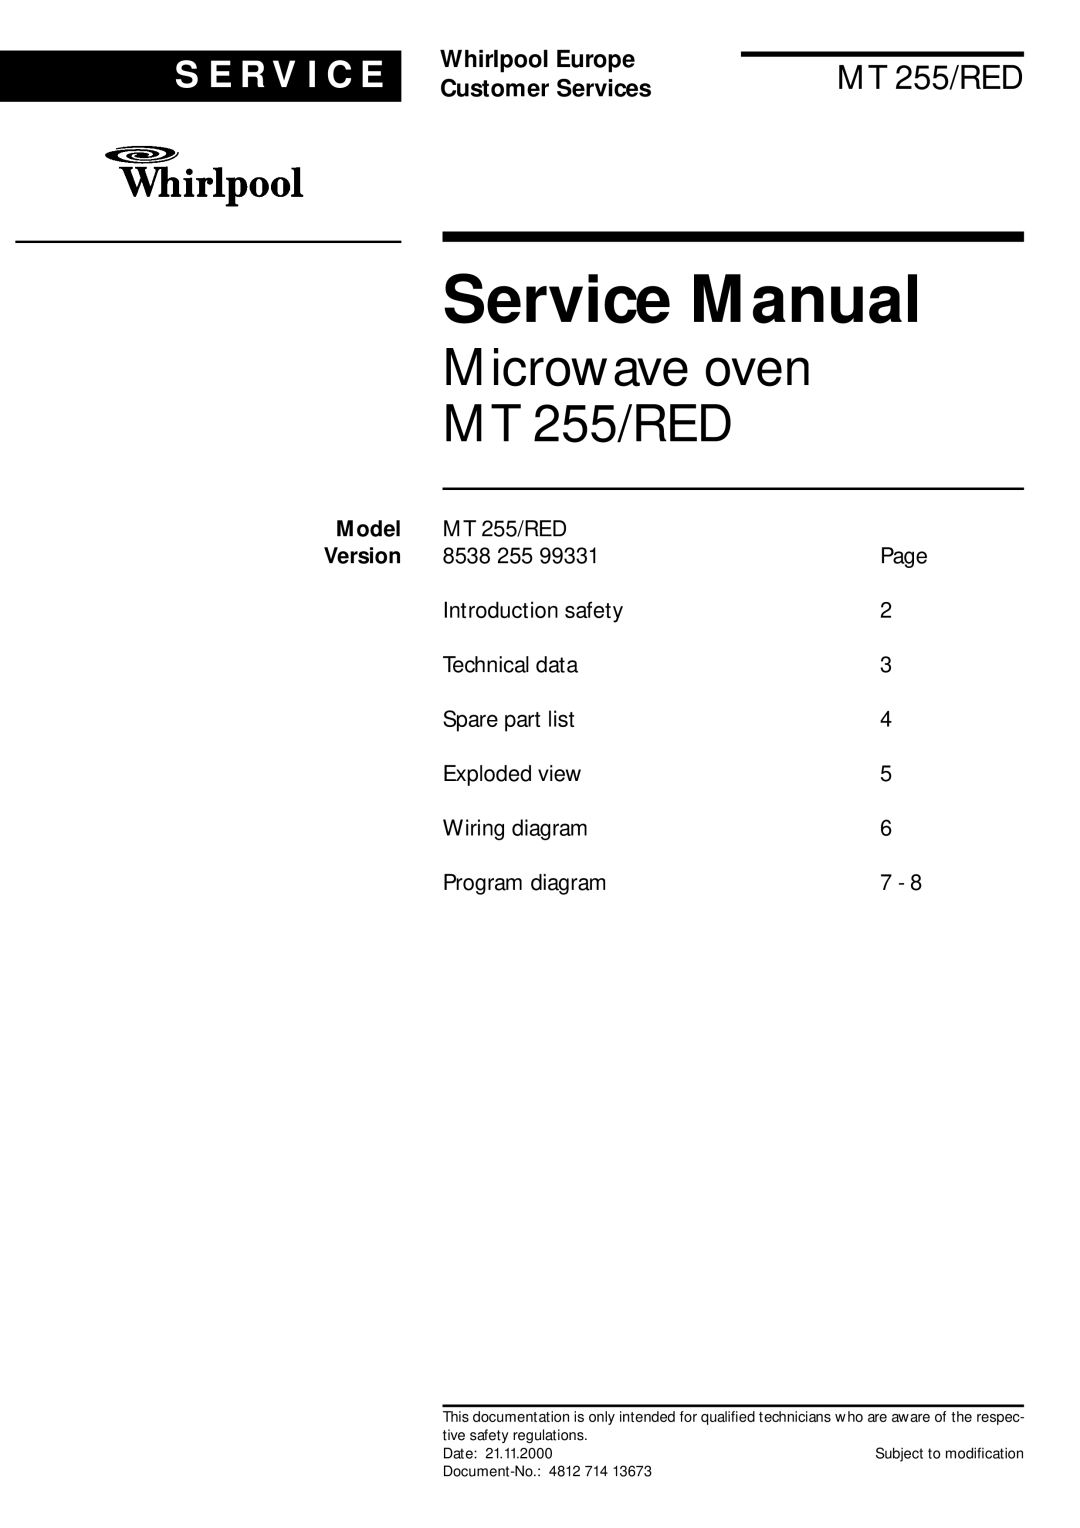 Whirlpool service manual Model, Microwave oven MT 255/RED, S E R V I C E, Whirlpool Europe, Customer Services 